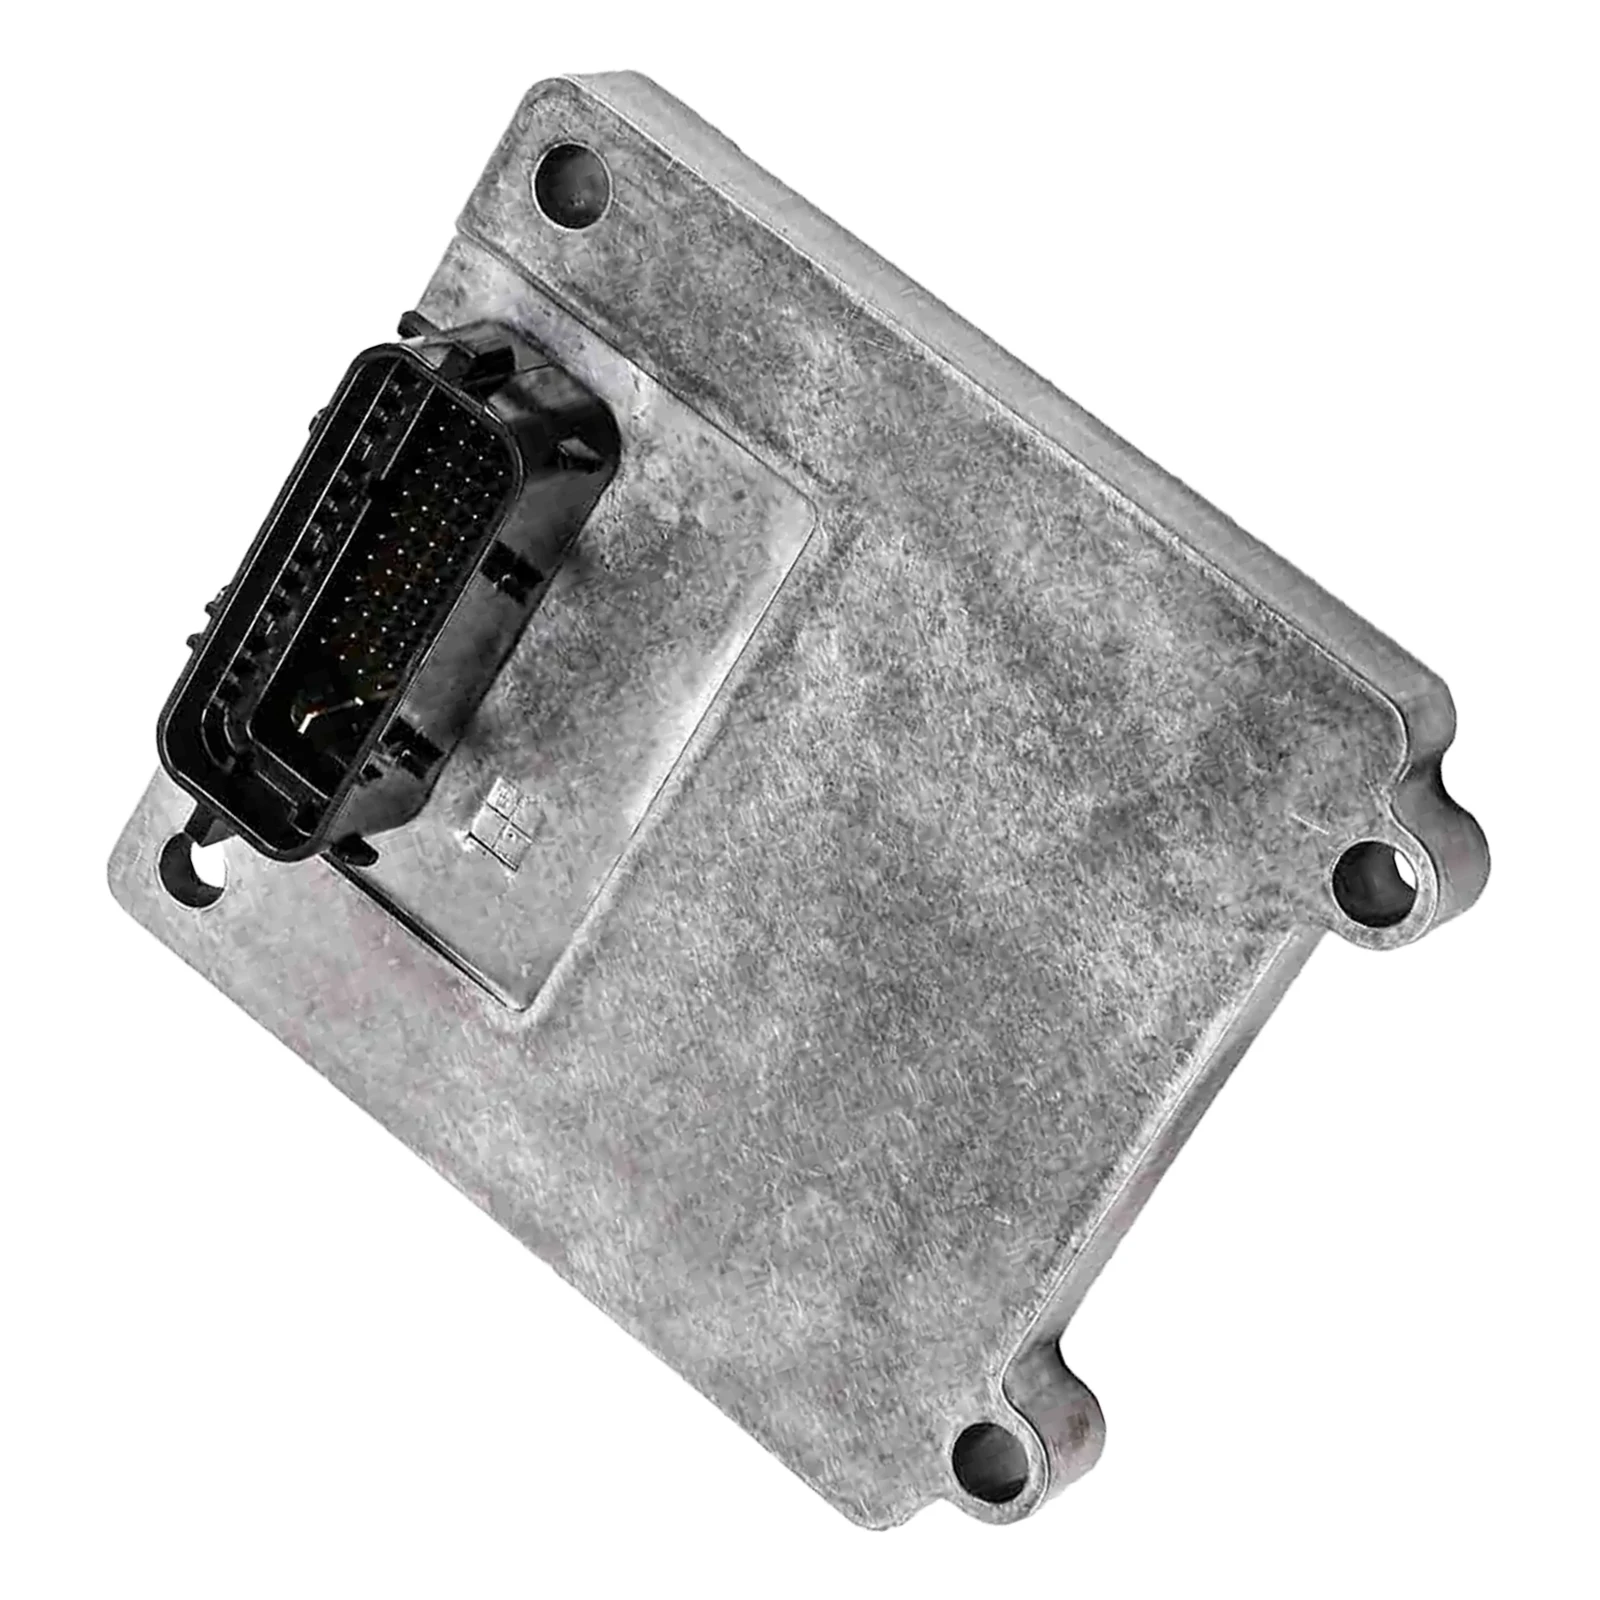 Transmission Control Module 2423450 24252114 24242391 Replacement suitable for 2005-2014